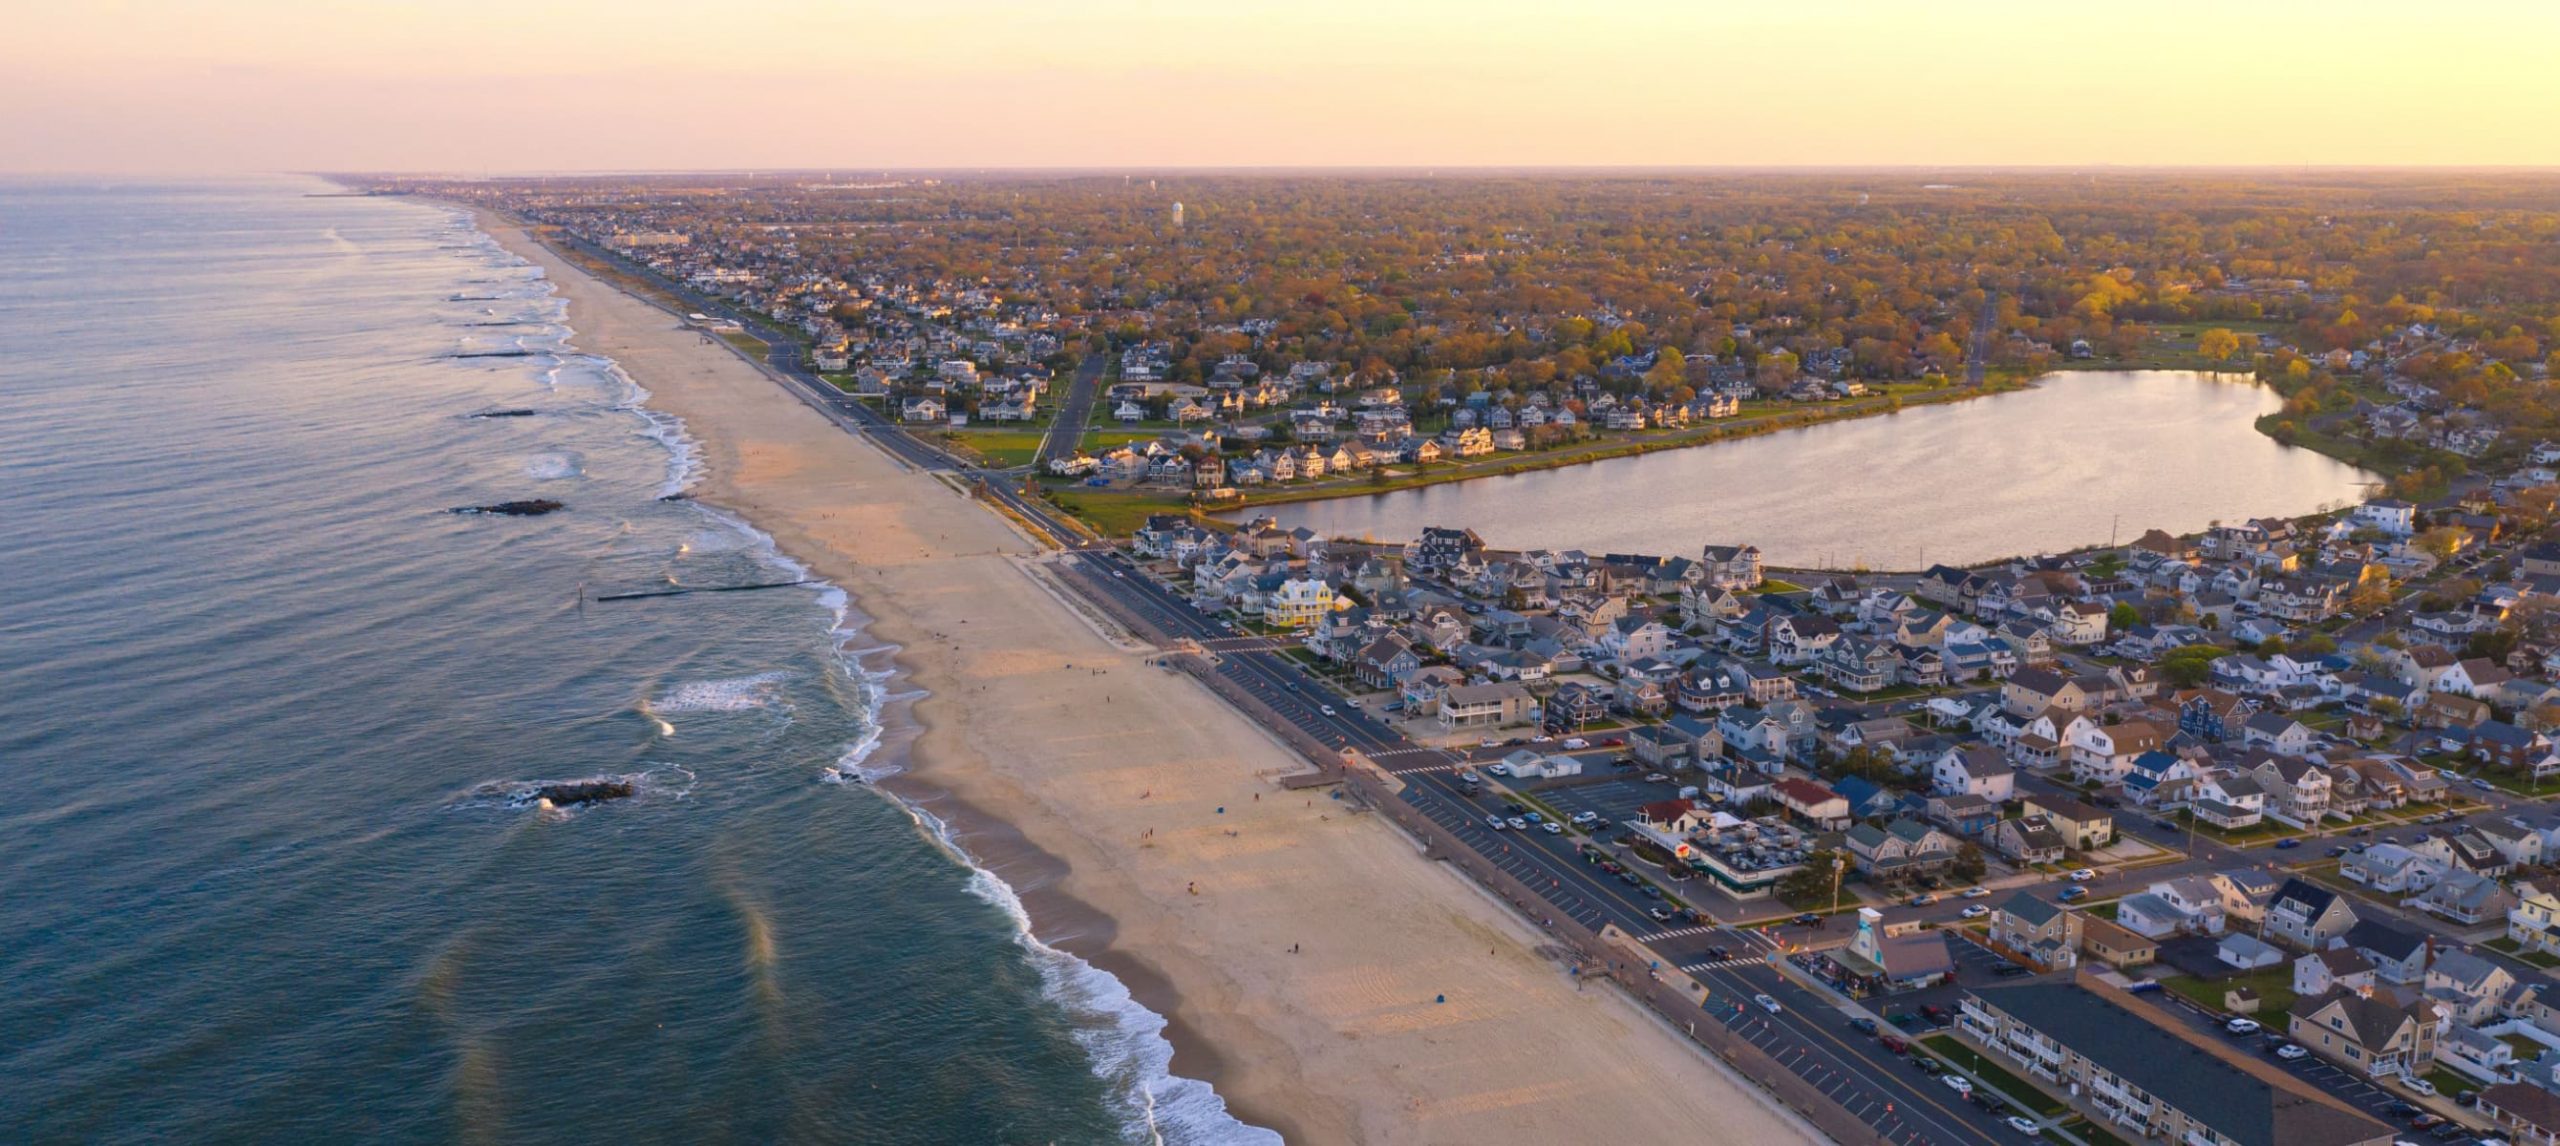 one of the beaches in New Jersey